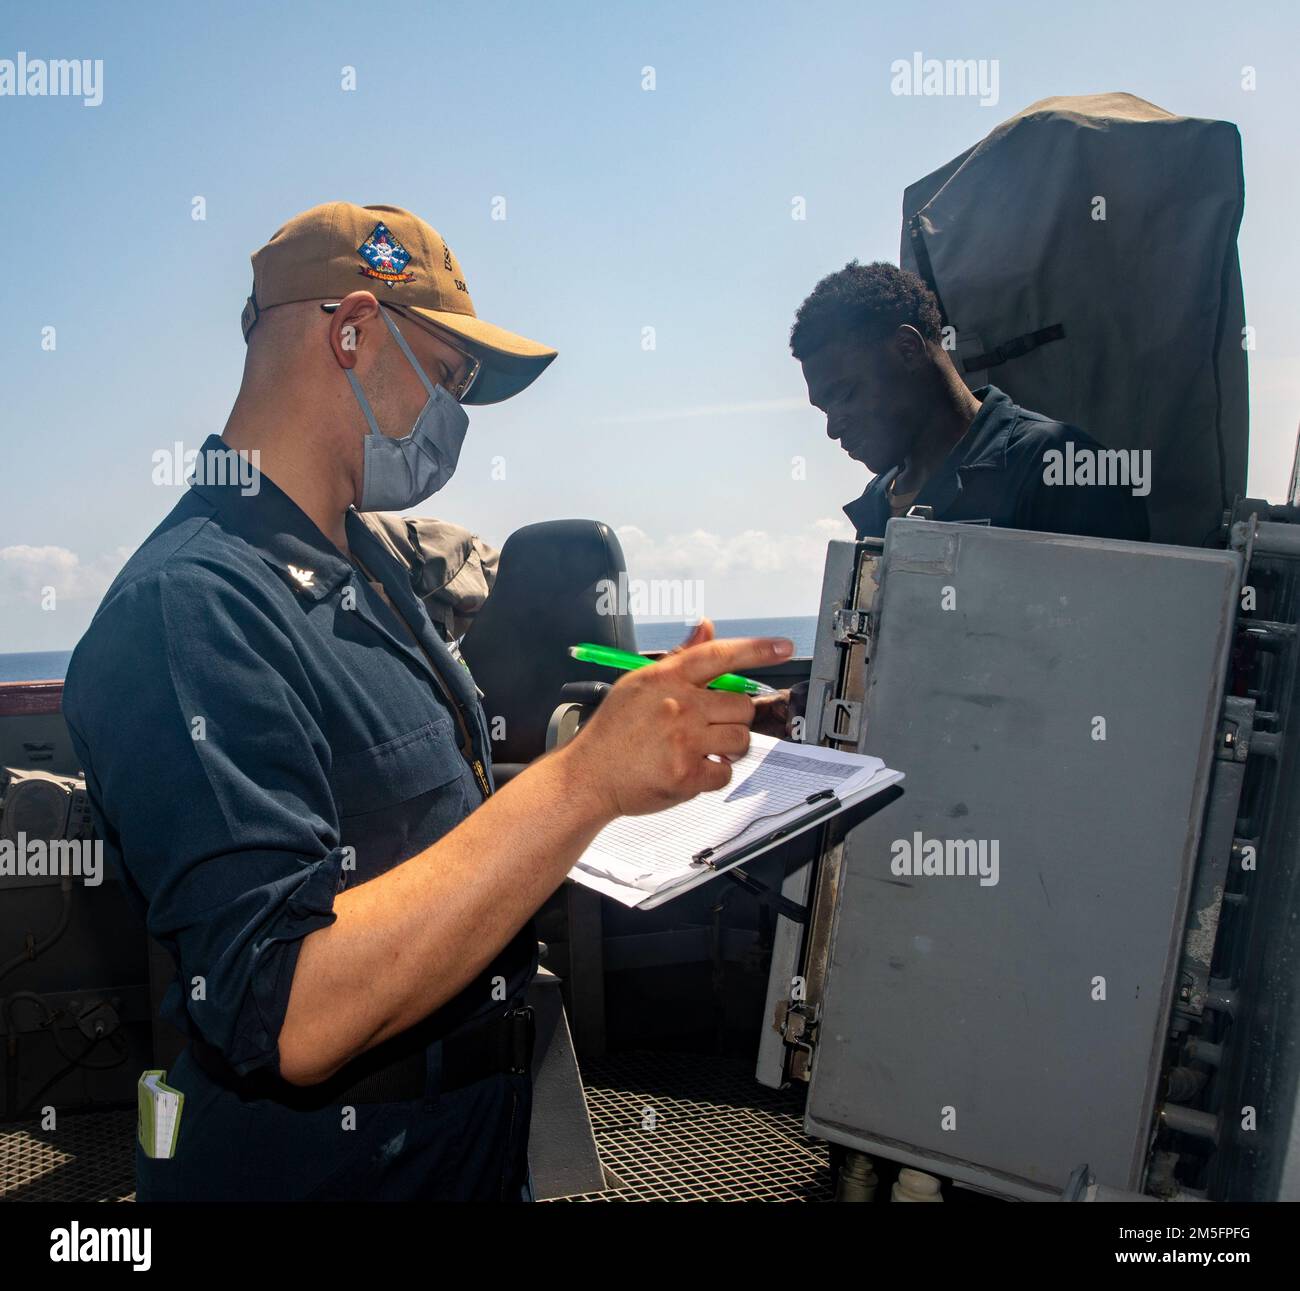 SOUTH CHINA SEA (March 14, 2022) Izaiah Irby, from Greenville, S.C., checks the exterior temperature aboard the Arleigh Burke-class guided-missile destroyer USS Ralph Johnson (DDG 114). Ralph Johnson is assigned to Task Force 71/Destroyer Squadron (DESRON) 15, the Navy’s largest forward-deployed DESRON and the U.S. 7th fleet’s principal surface force. Stock Photo